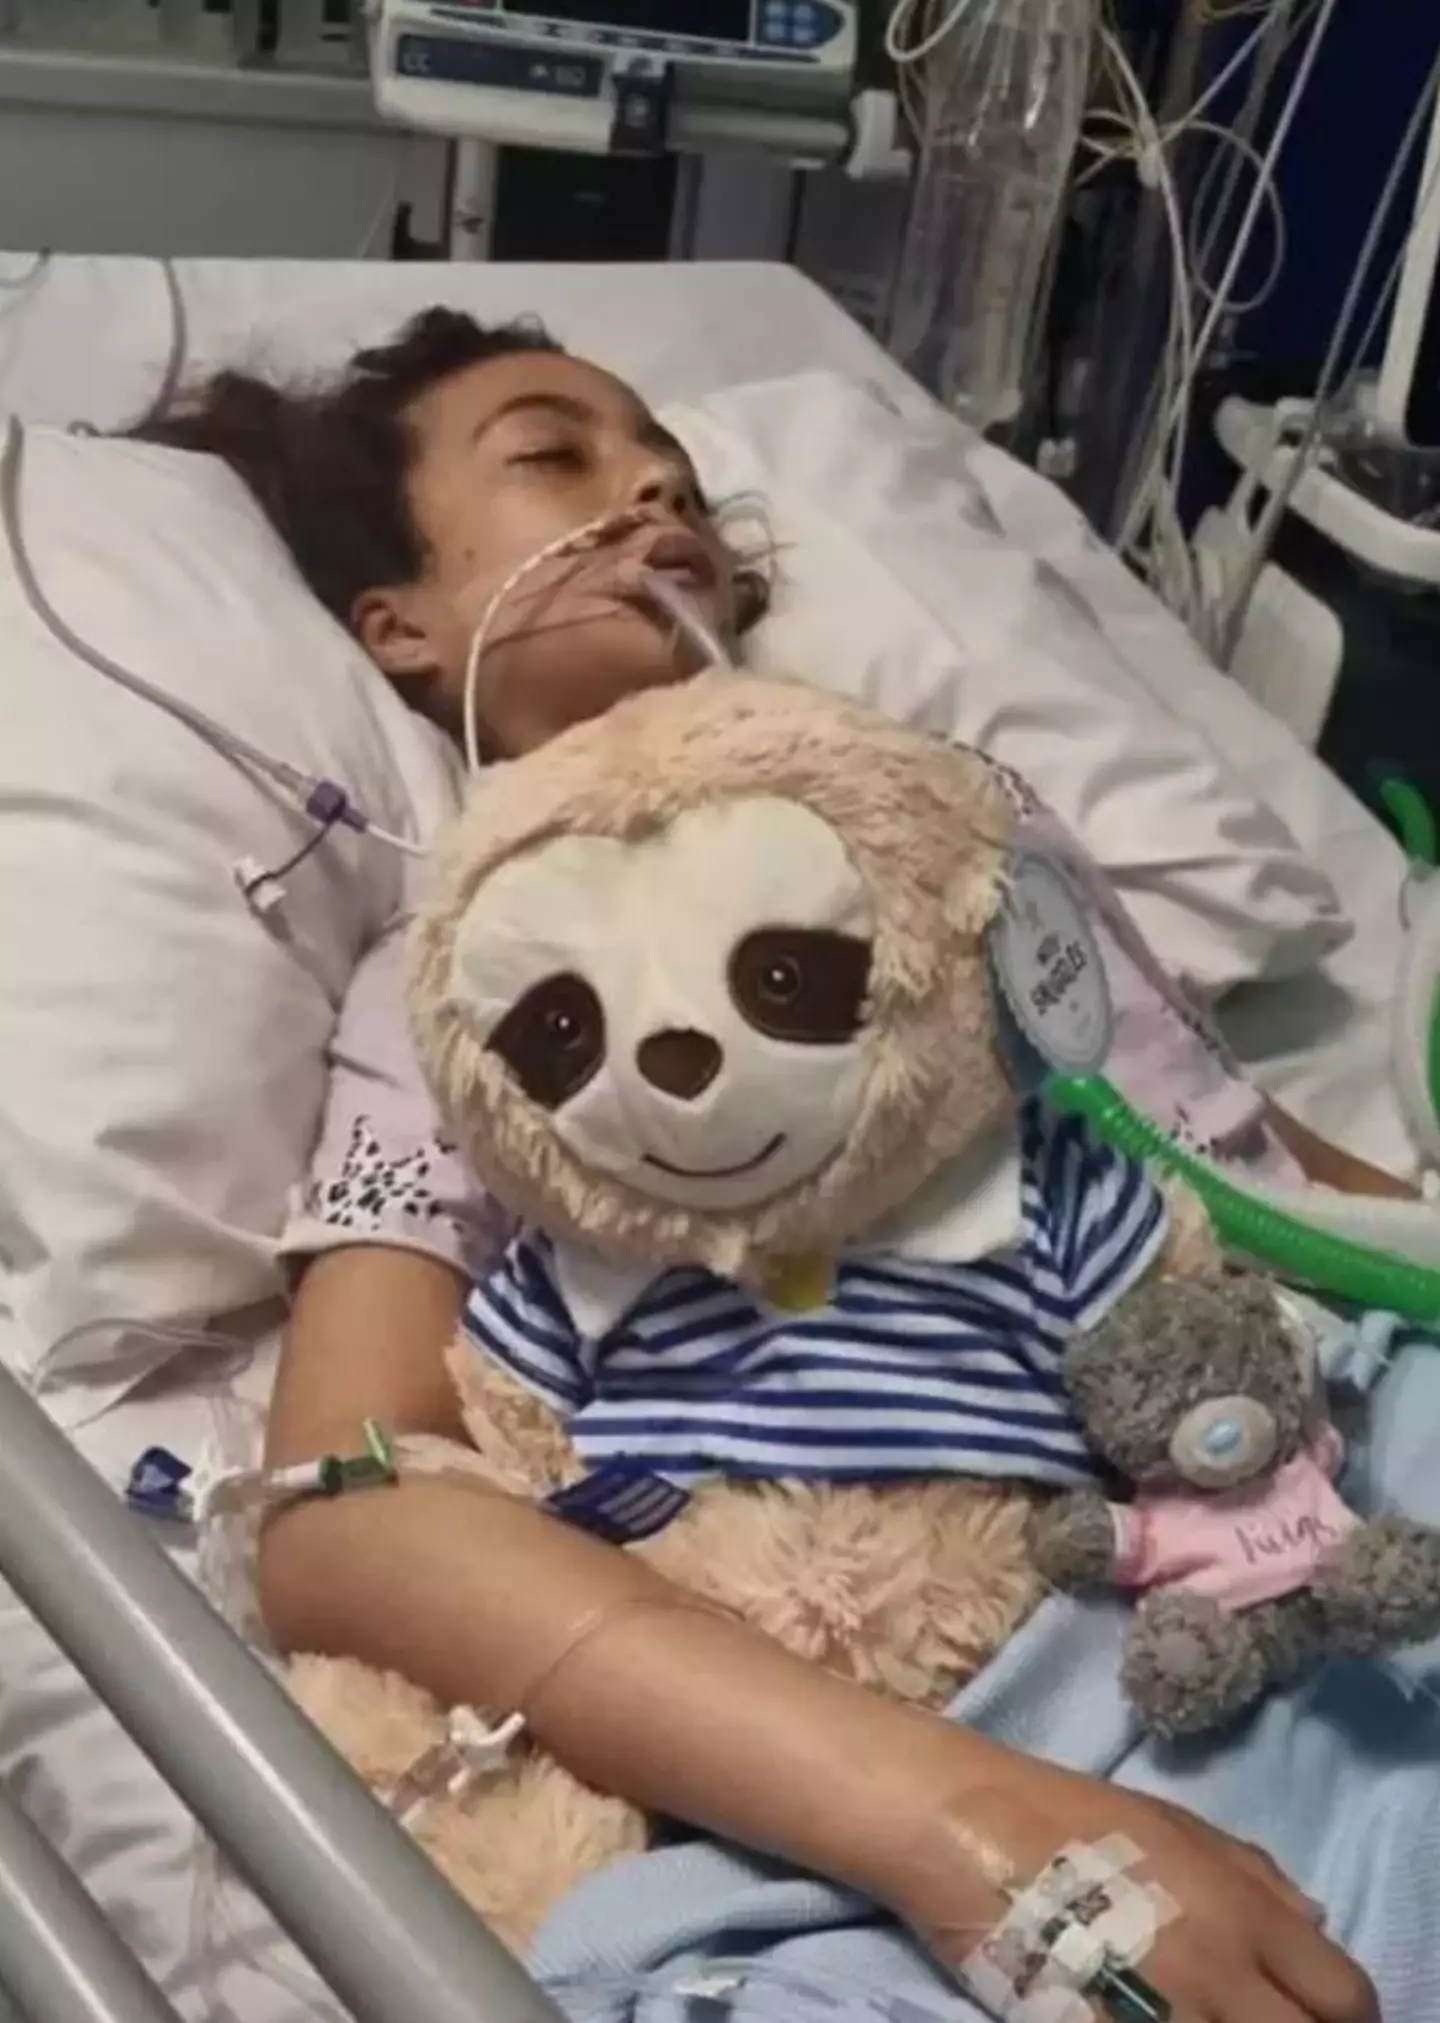 Sarah was placed in a coma after being rushed to hospital.